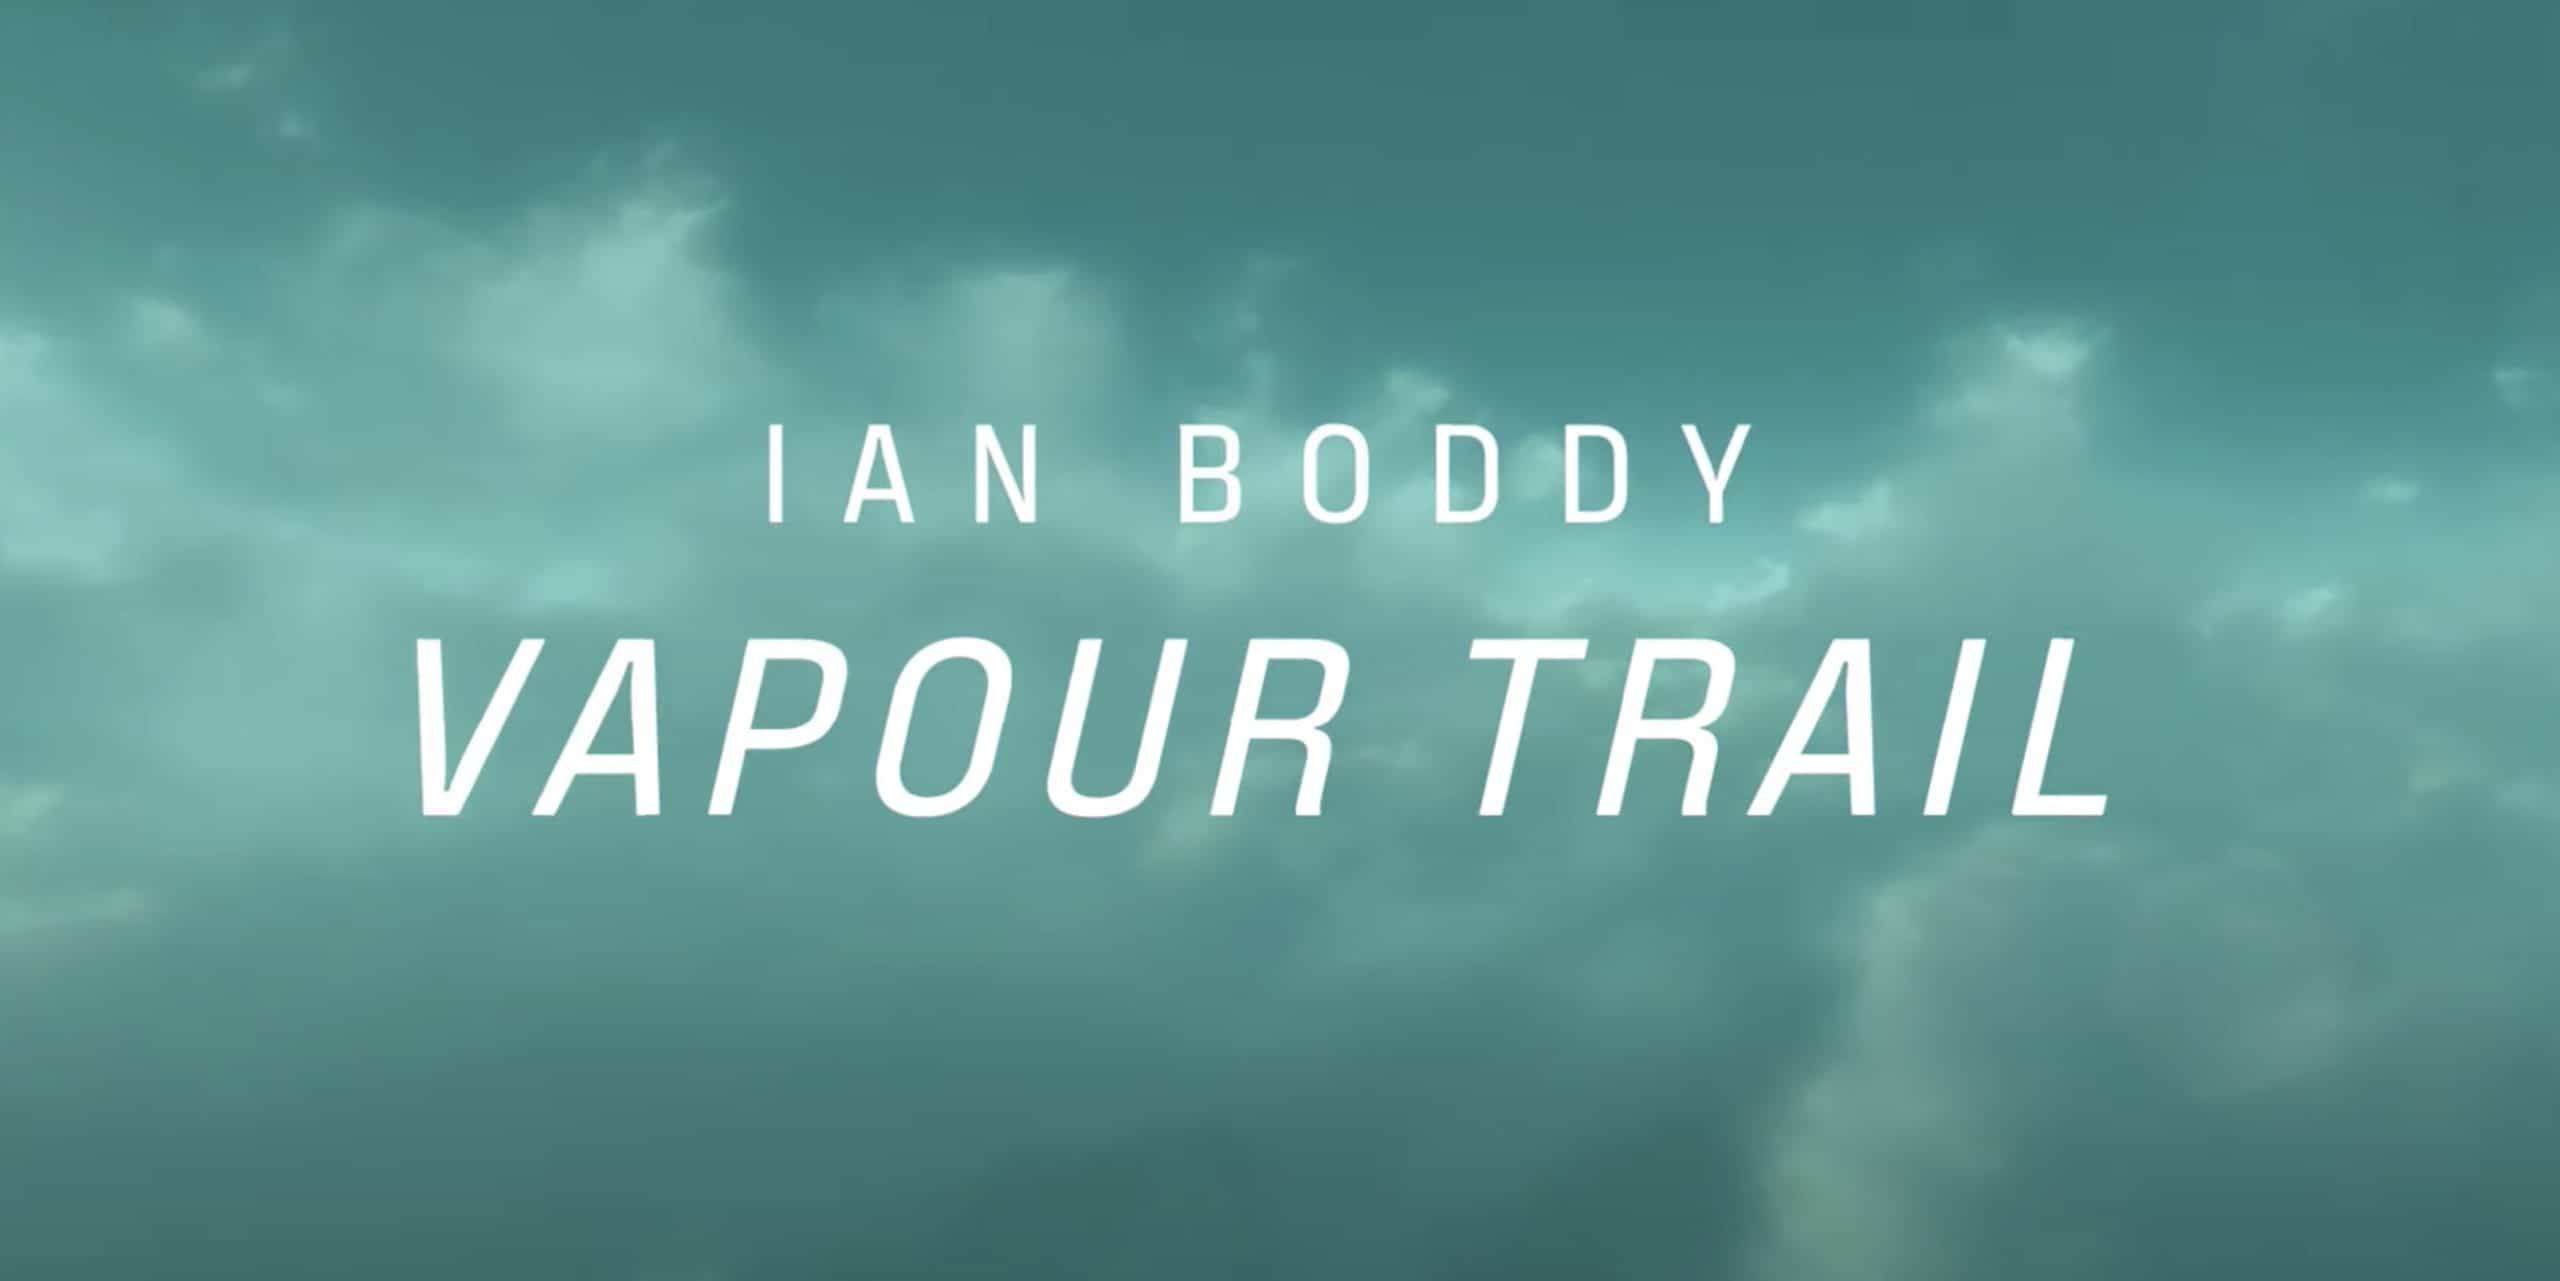 New Sound Pack: Ian Boddy | Vapour Trail for The Attic 2 by Soniccouture